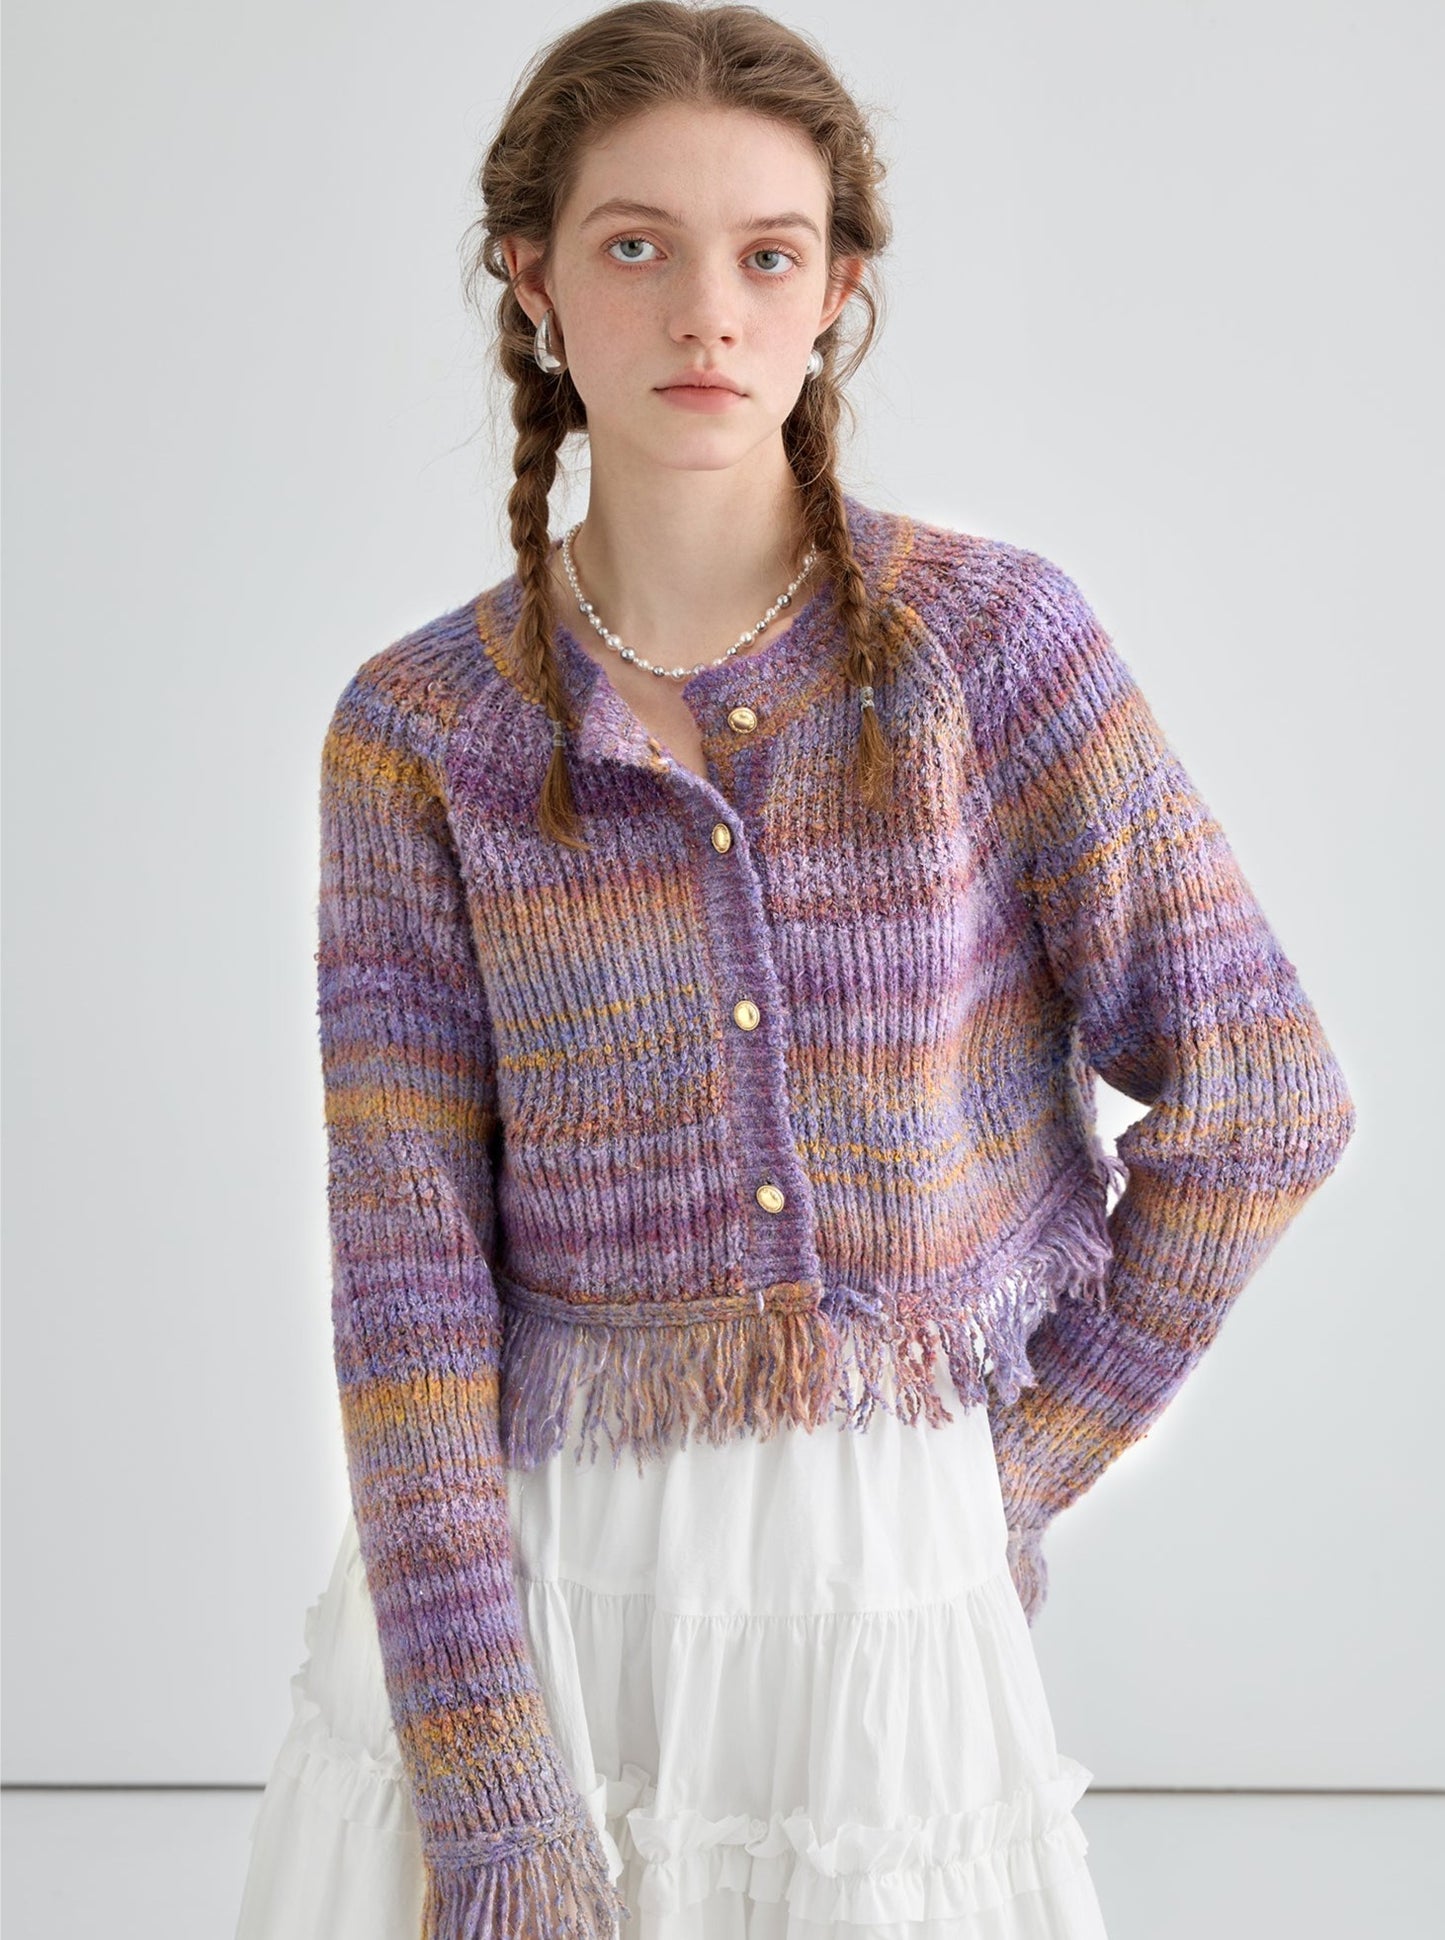 Raw-edged knitted cardigan tops